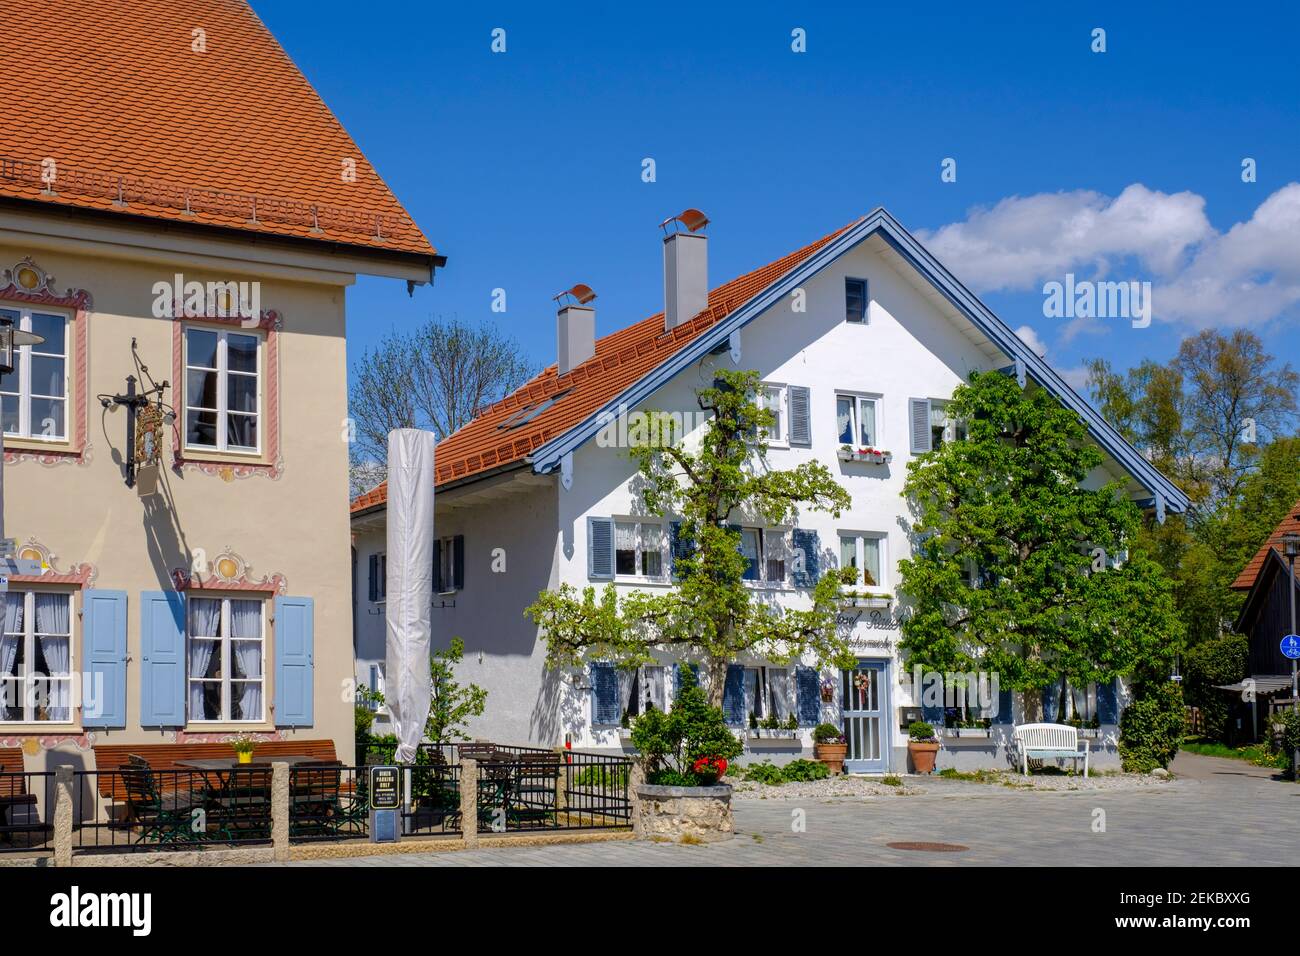 Germany, Bavaria, Diessen am Ammersee, Building facade covered with creeping plant Stock Photo